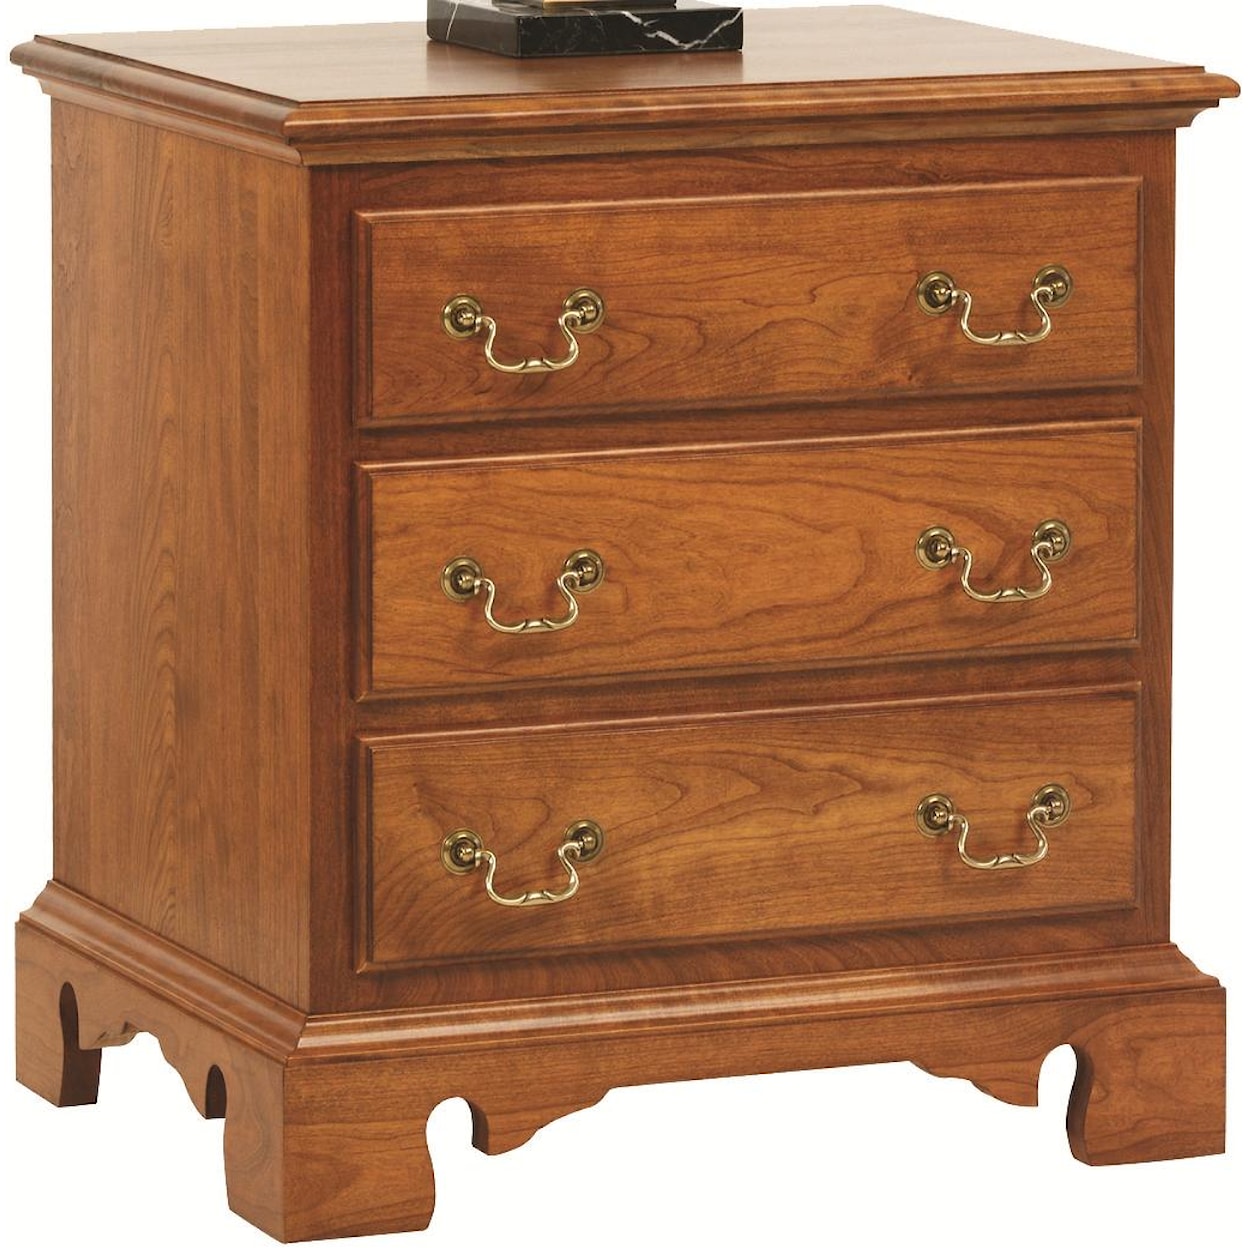 Millcraft Victoria's Tradition Nightstand